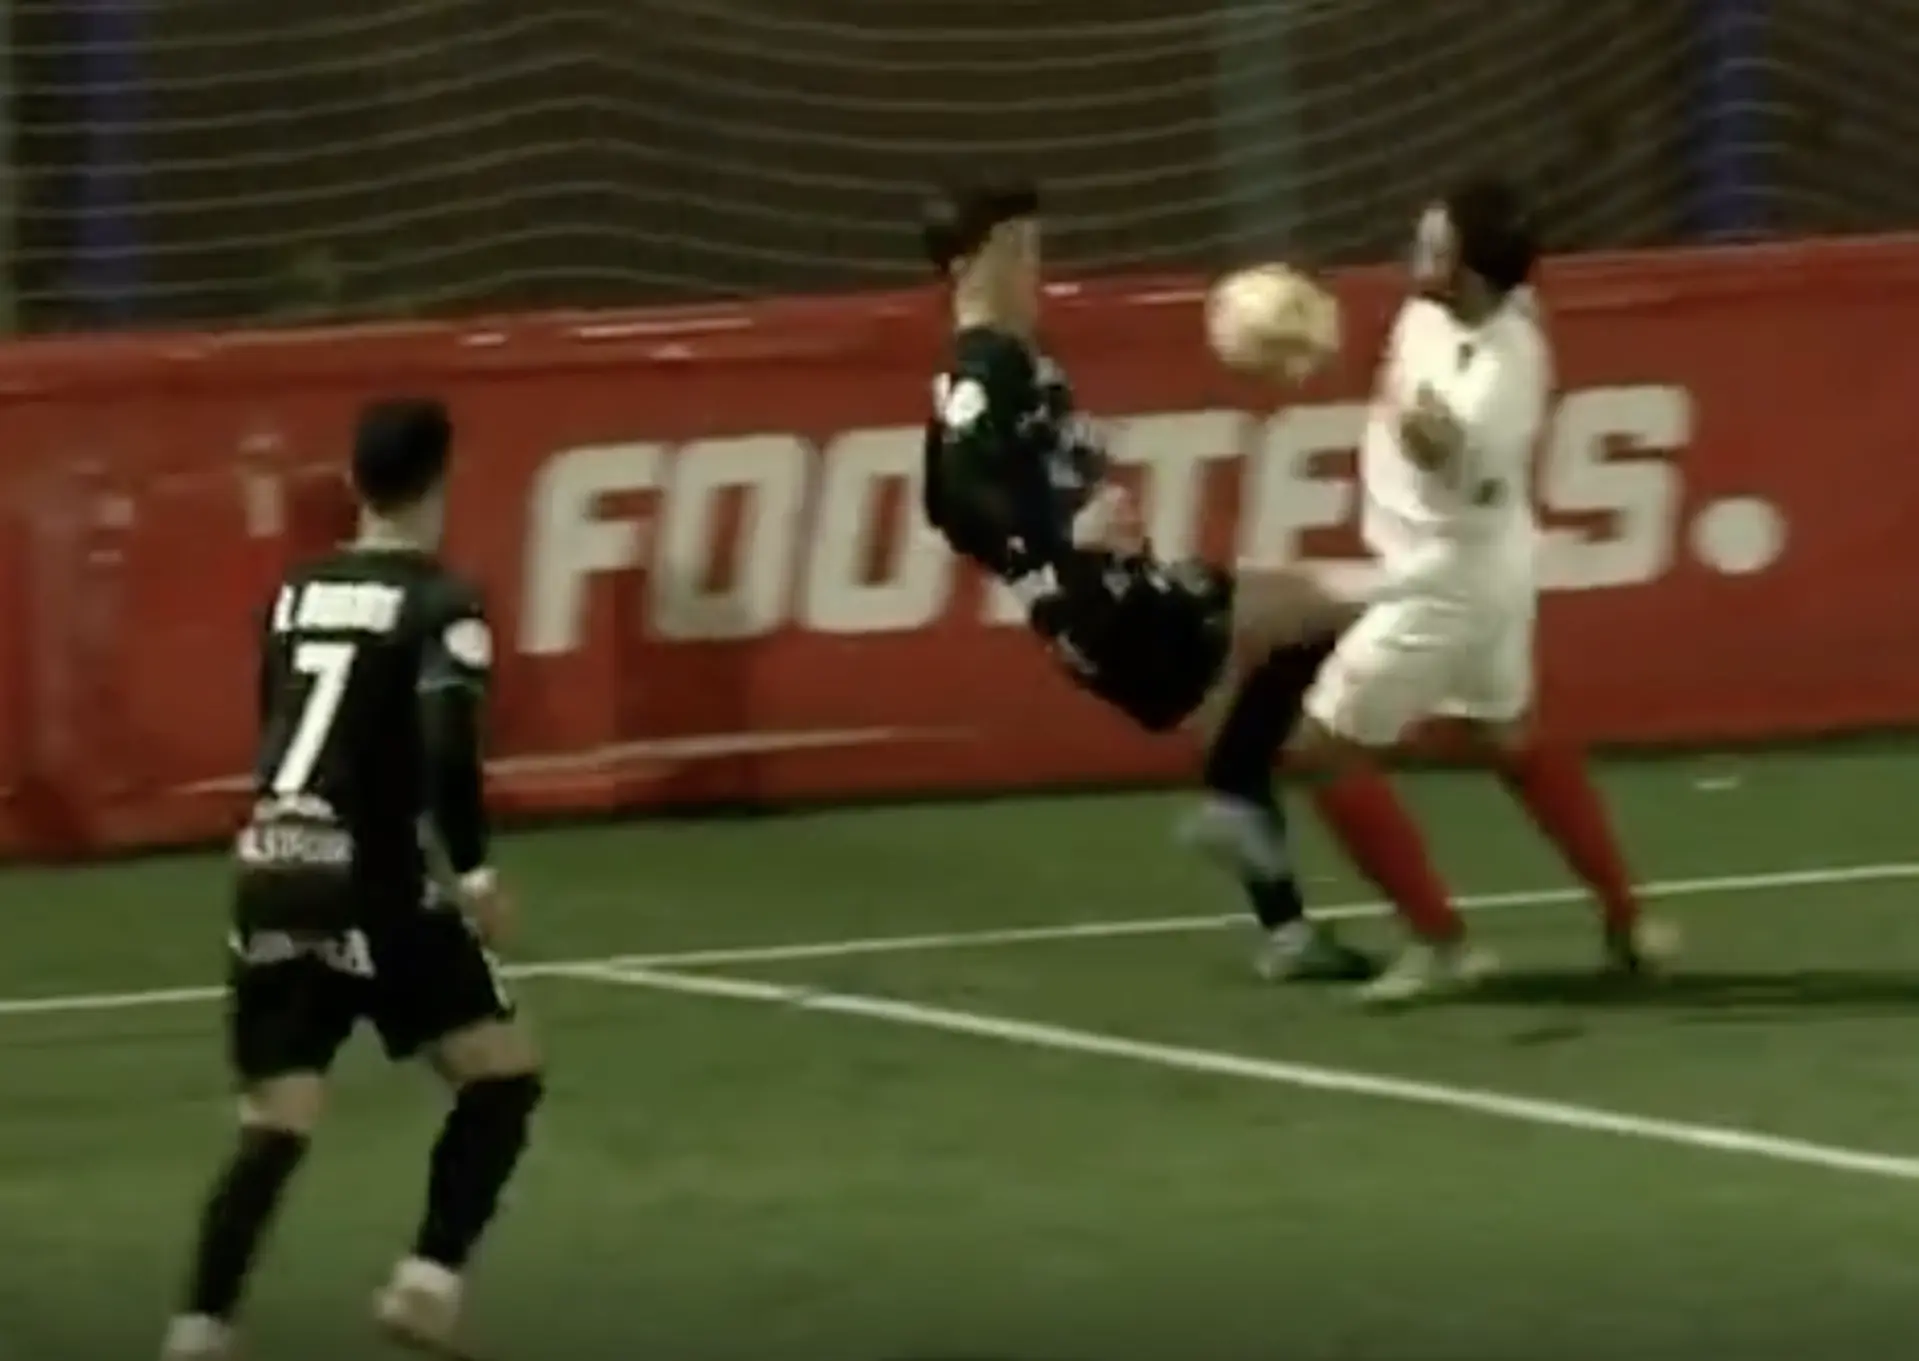 72388d3d aed0 4f52 bec1 f228a3c4c2bc?width=1920&quality=75 Barca's new signing Pablo Torre destroys two opponents with crazy skills in 5 seconds